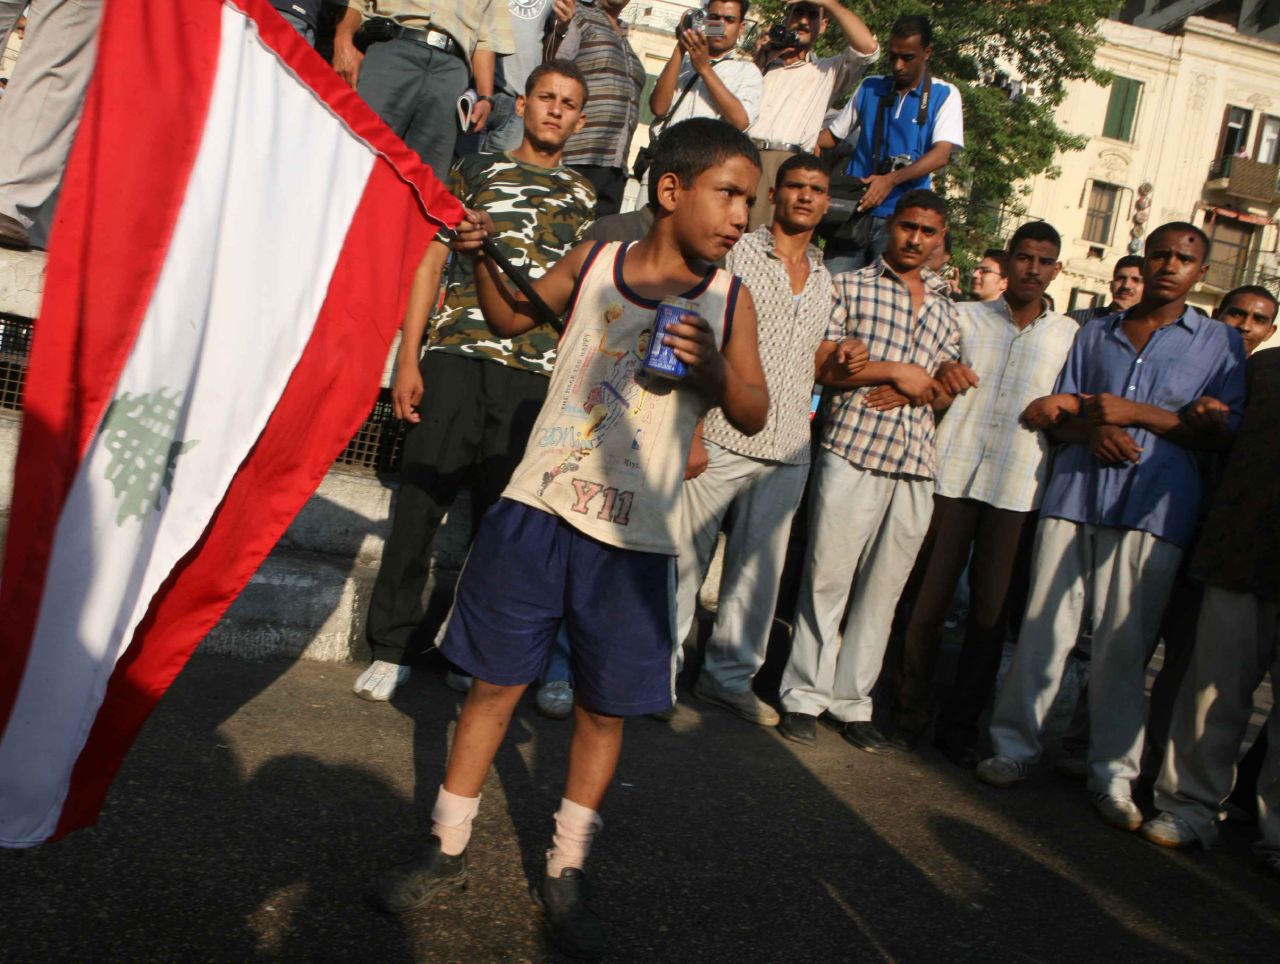 Child waving a Lebanese flag in Tahrir Square (Photo by Amr Abdallah, 26 July 2006)